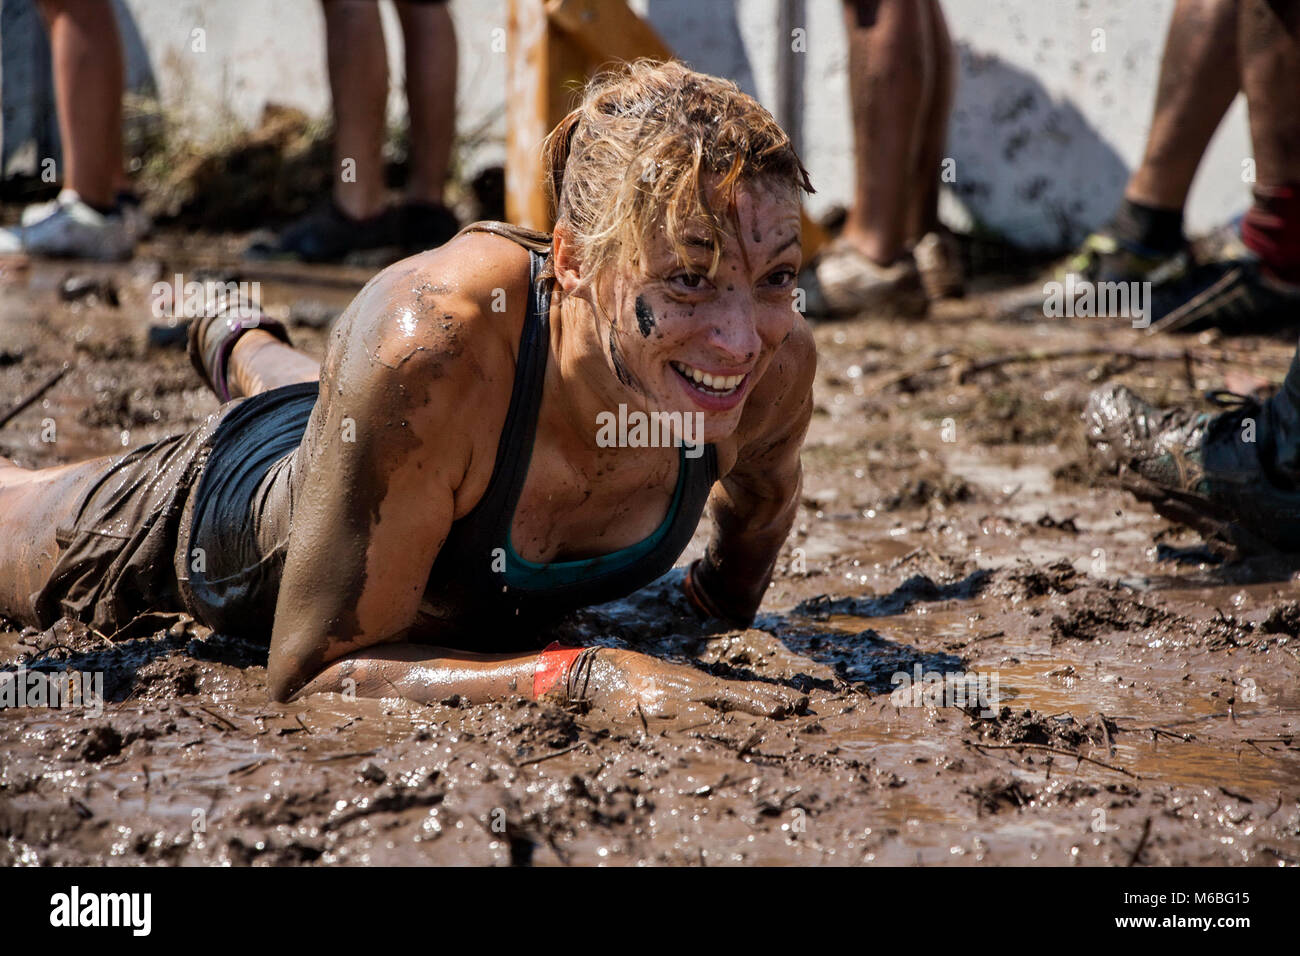 Young woman crawling in the mud; participation in extreme sport, physical strength challenge Stock Photo